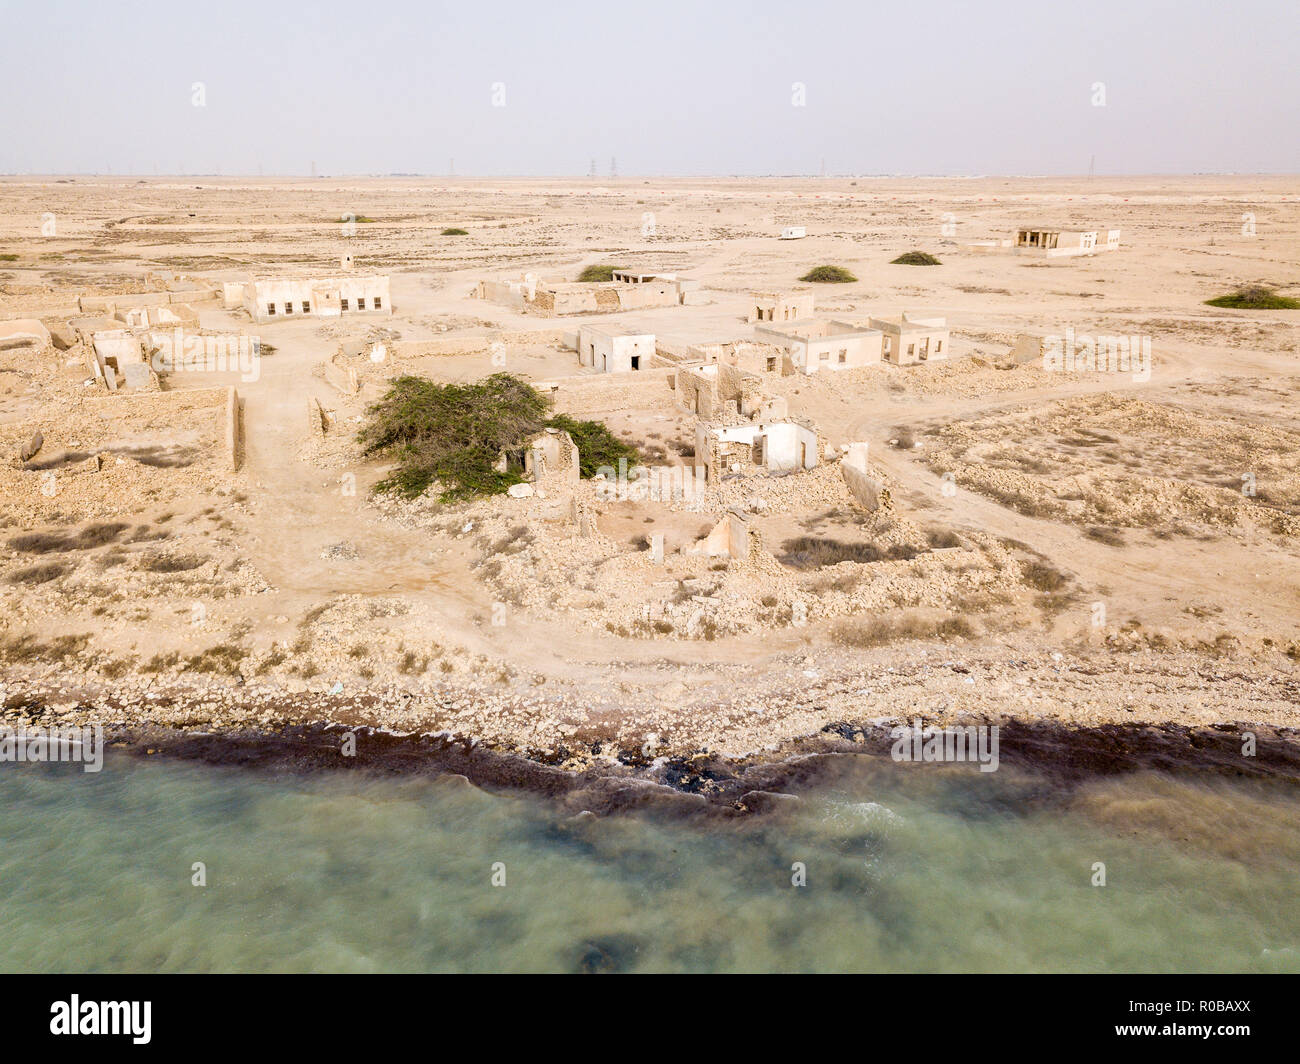 Ruined ancient old Arab pearling and fishing town Al Jumail, Qatar. The desert at coast of Persian Gulf. Abandoned mosque with minaret. Deserted town Stock Photo